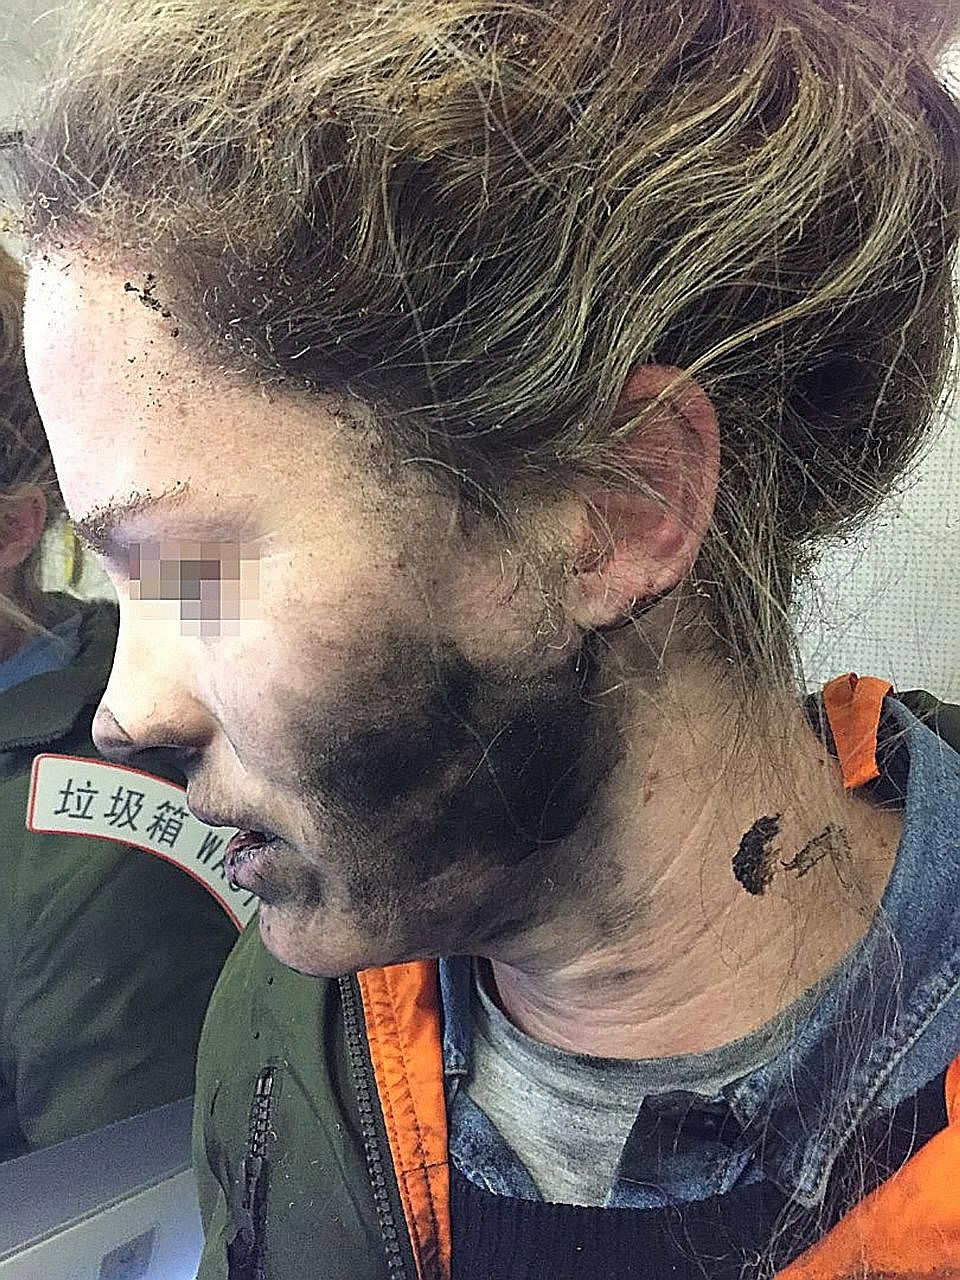 The battery-operated headphones exploded while the woman was listening to music and dozing about two hours into her flight from Beijing to Melbourne on Feb 19.